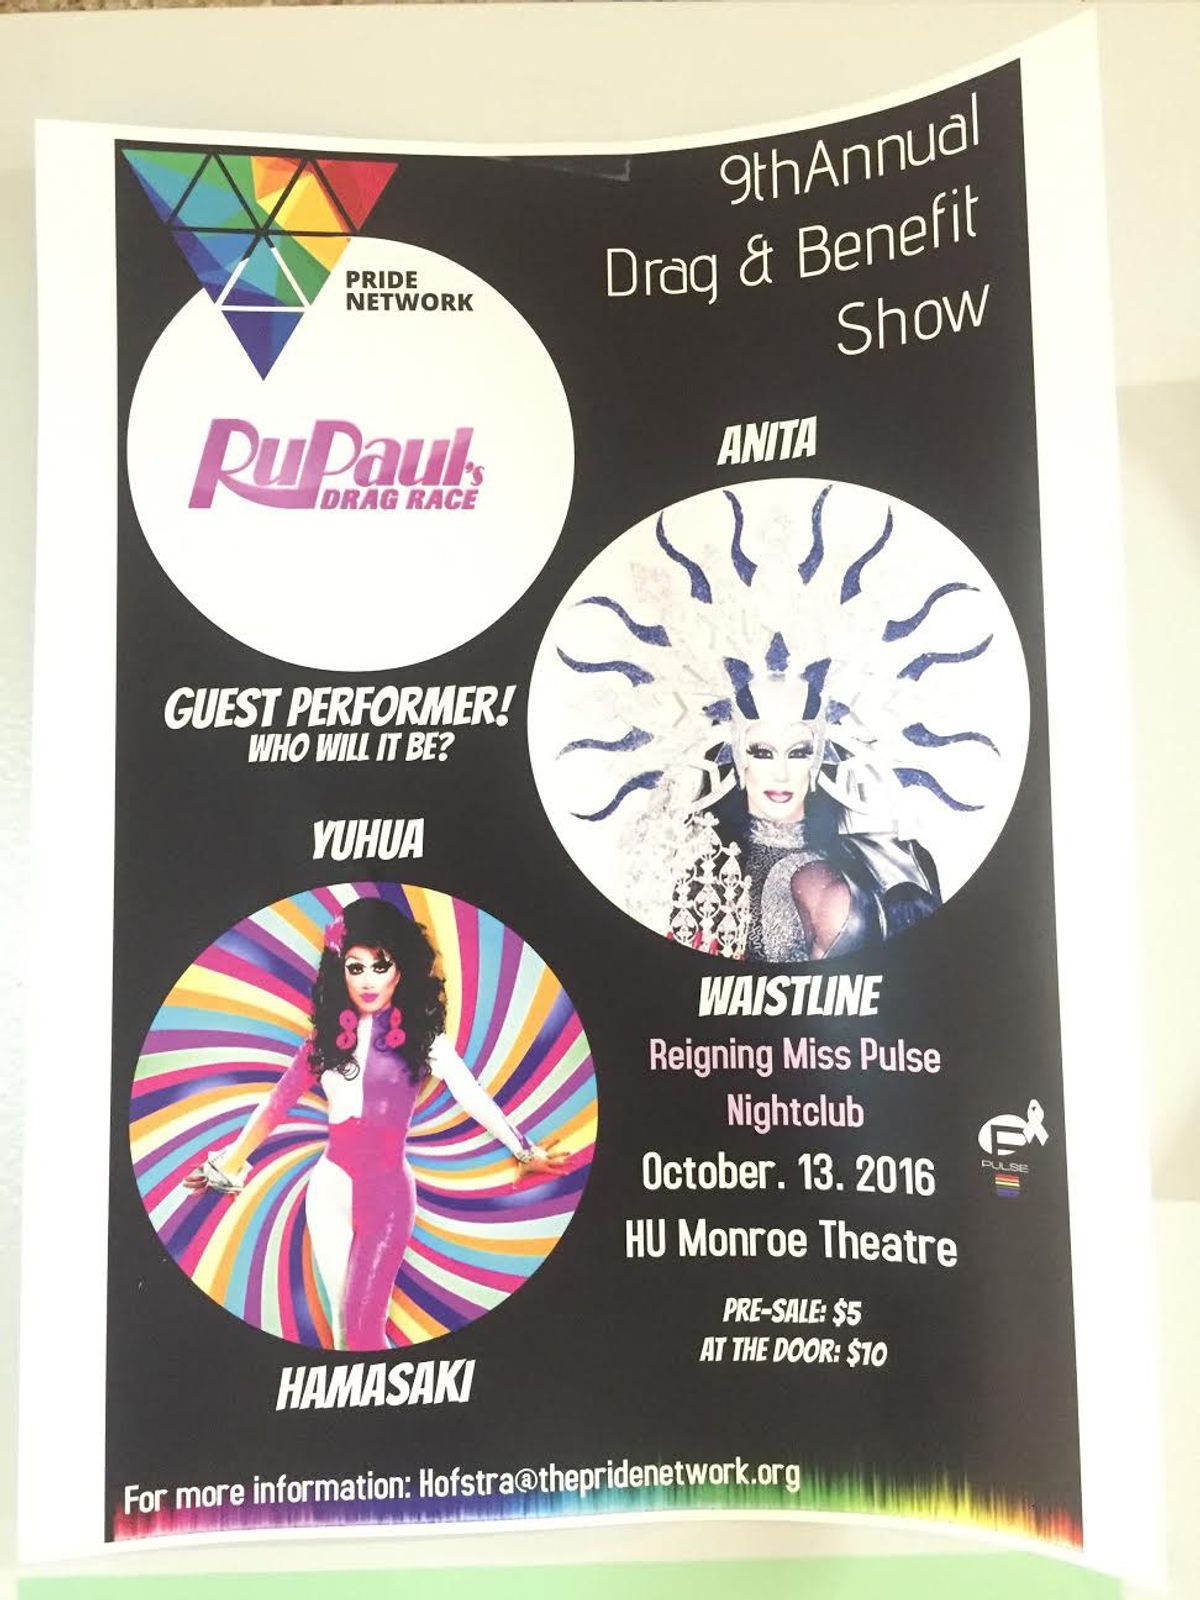 Hofstra University's Ninth Annual Drag Show and Benefit